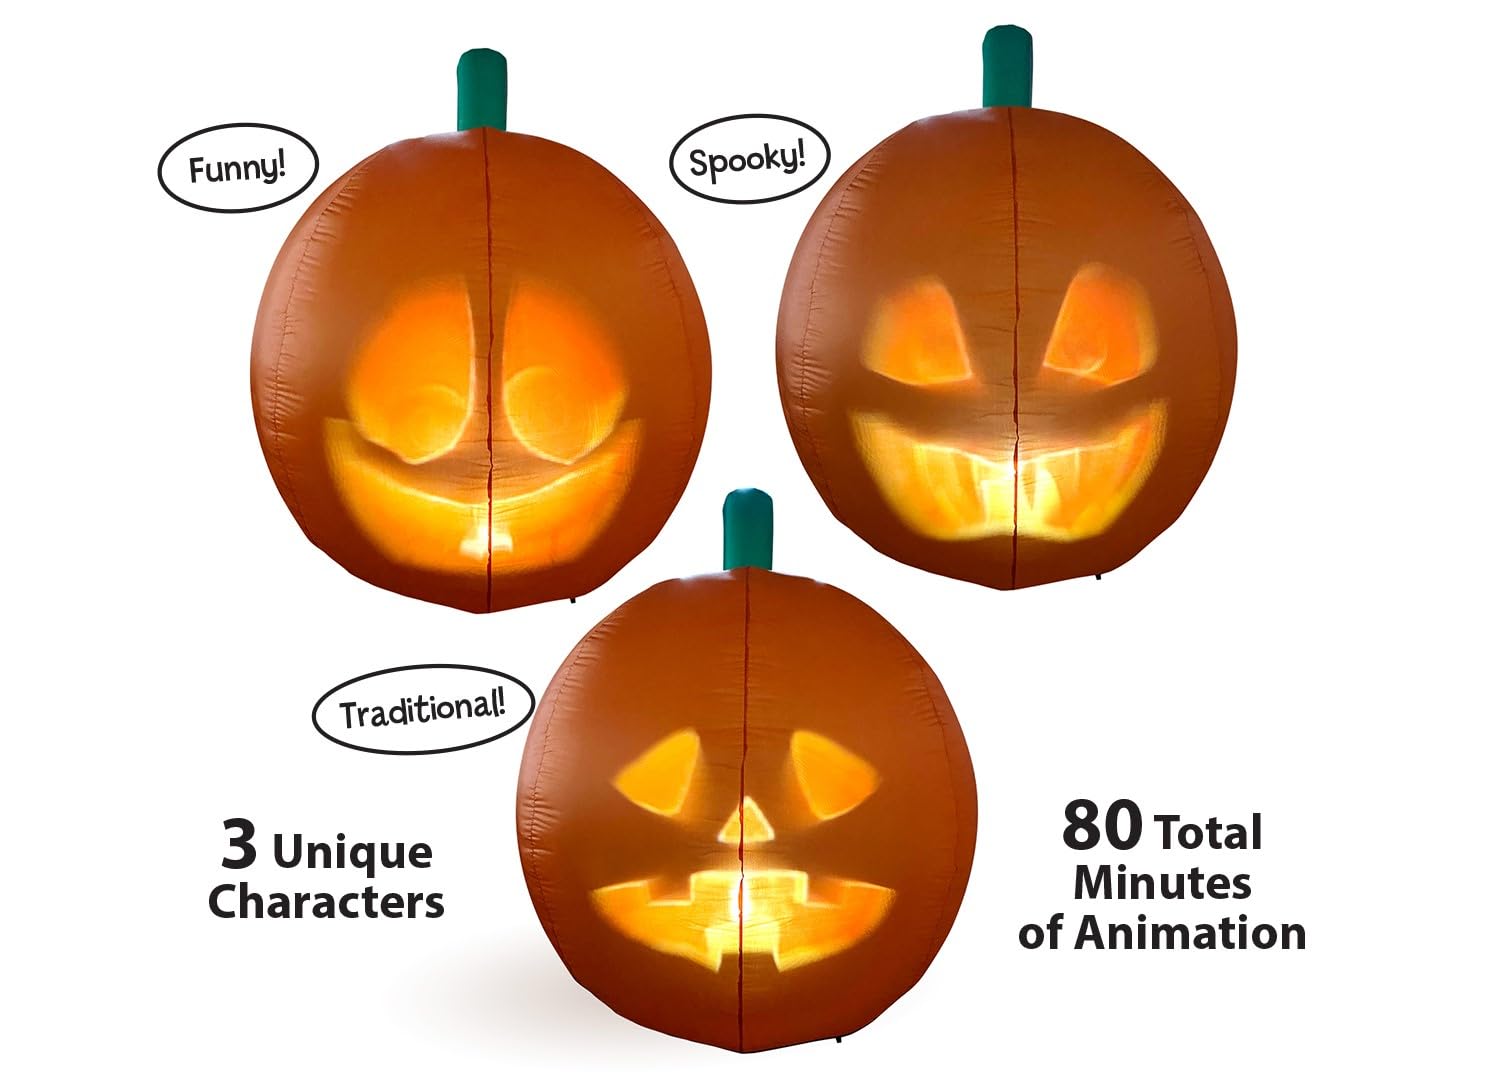 ANIMAT3D Inflatable Jabberin' Jack 5 Foot Tall Talking Animated Pumpkin with Built in Projector & Speaker Plug'n Play